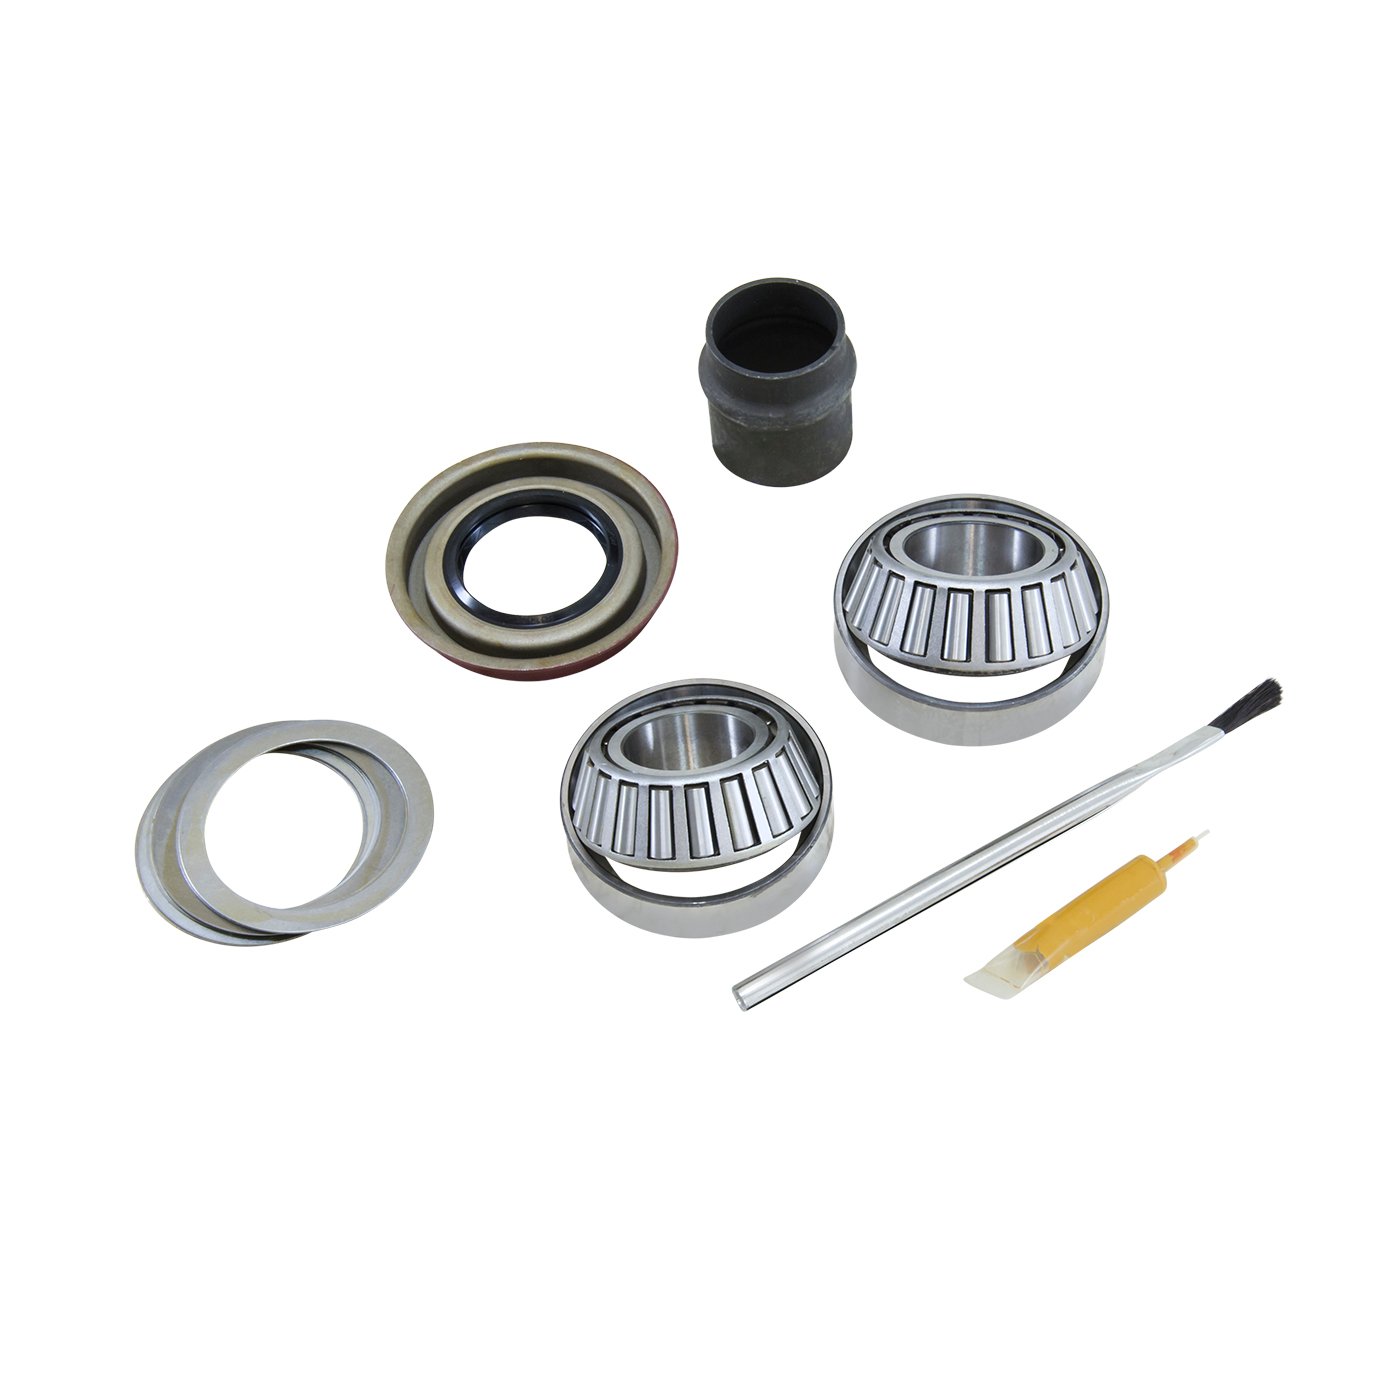 Pinion Install Kit For '83-'97 GM 7.2 in. S10 And S15 Differential